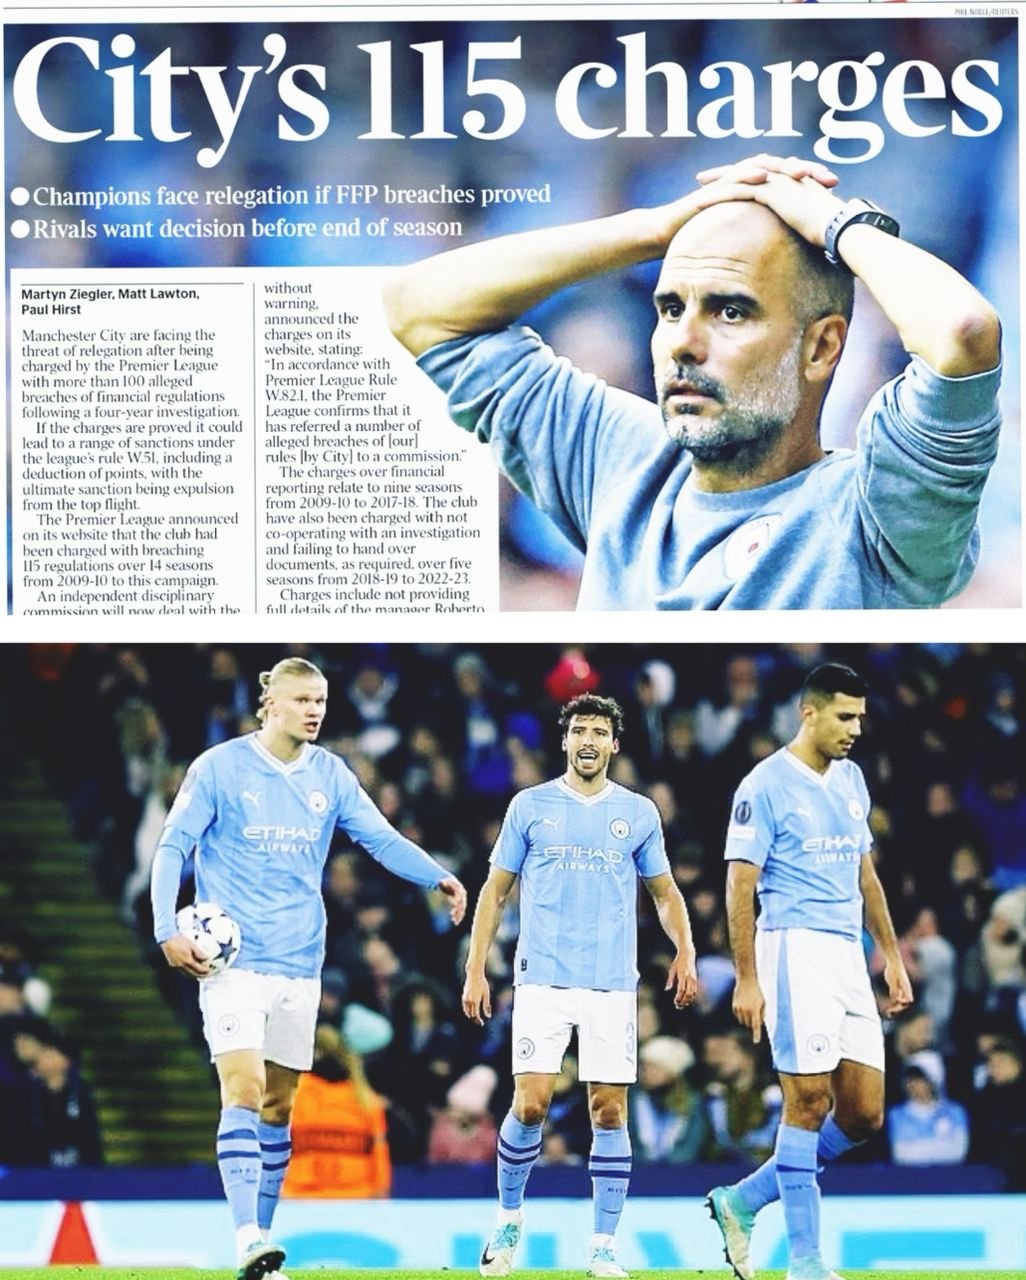 Manchester City Man City Financial Fair Play charges - Recent events